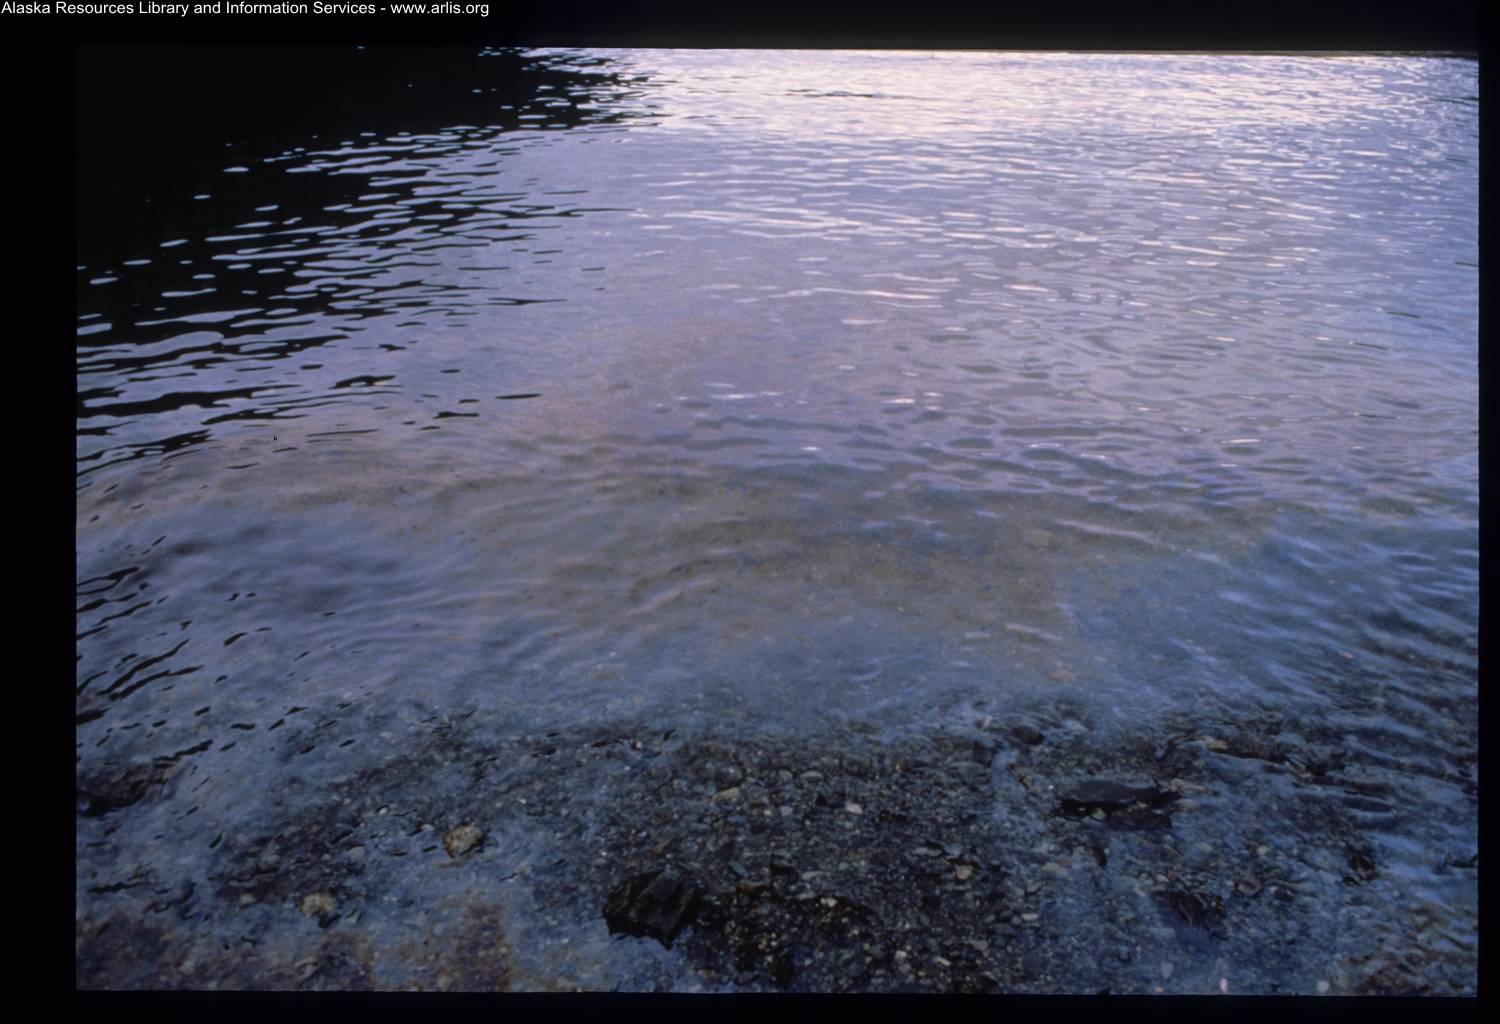 Oil sheen bleeds from the beach at Herring Bay on Knight Island on Dec. 7, 1989. (Courtesy Photo / ARLIS Reference)